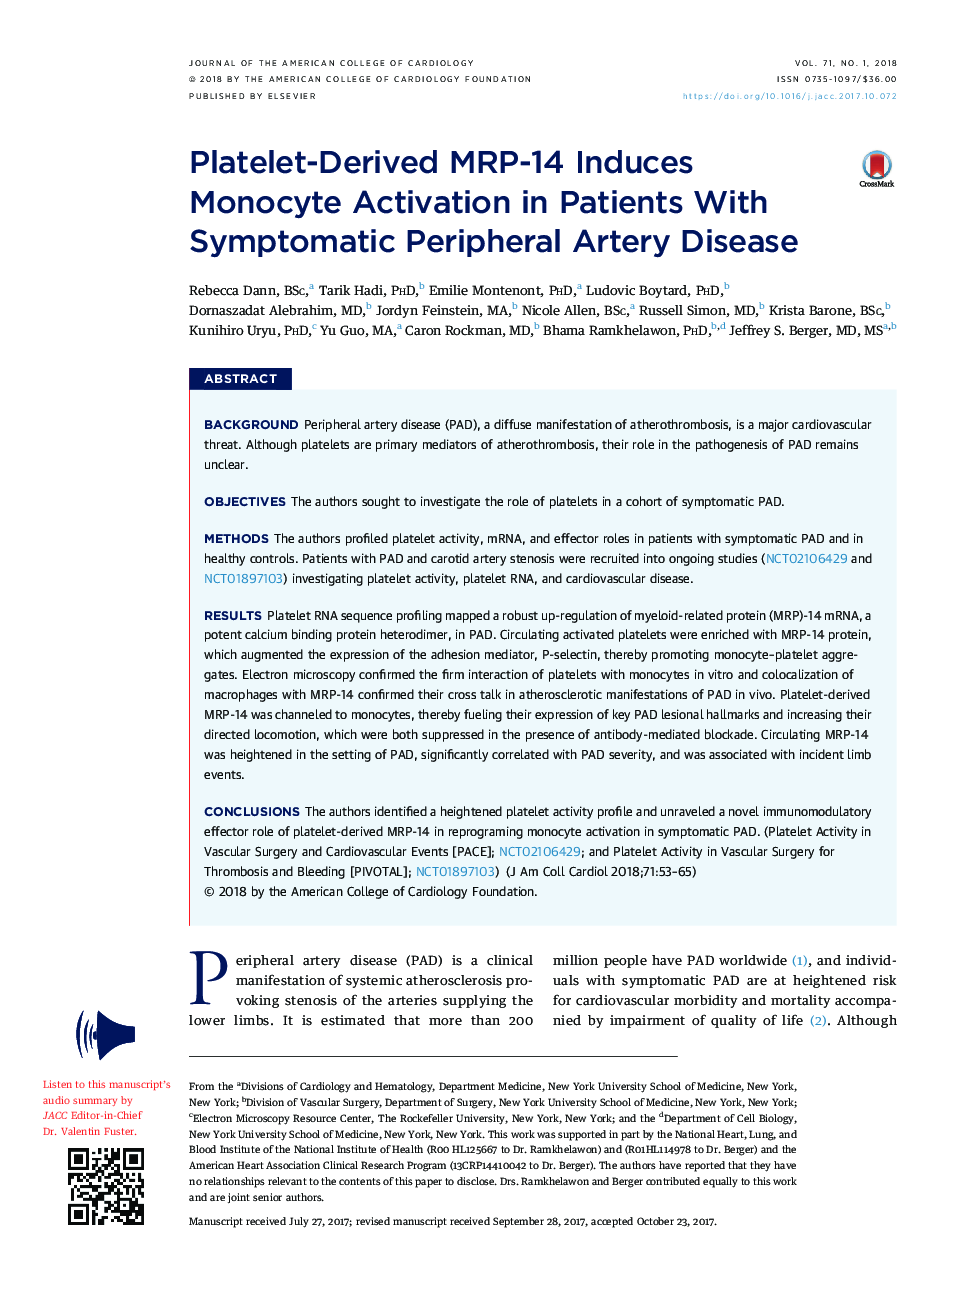 Platelet-Derived MRP-14 Induces Monocyte Activation in Patients With Symptomatic Peripheral Artery Disease